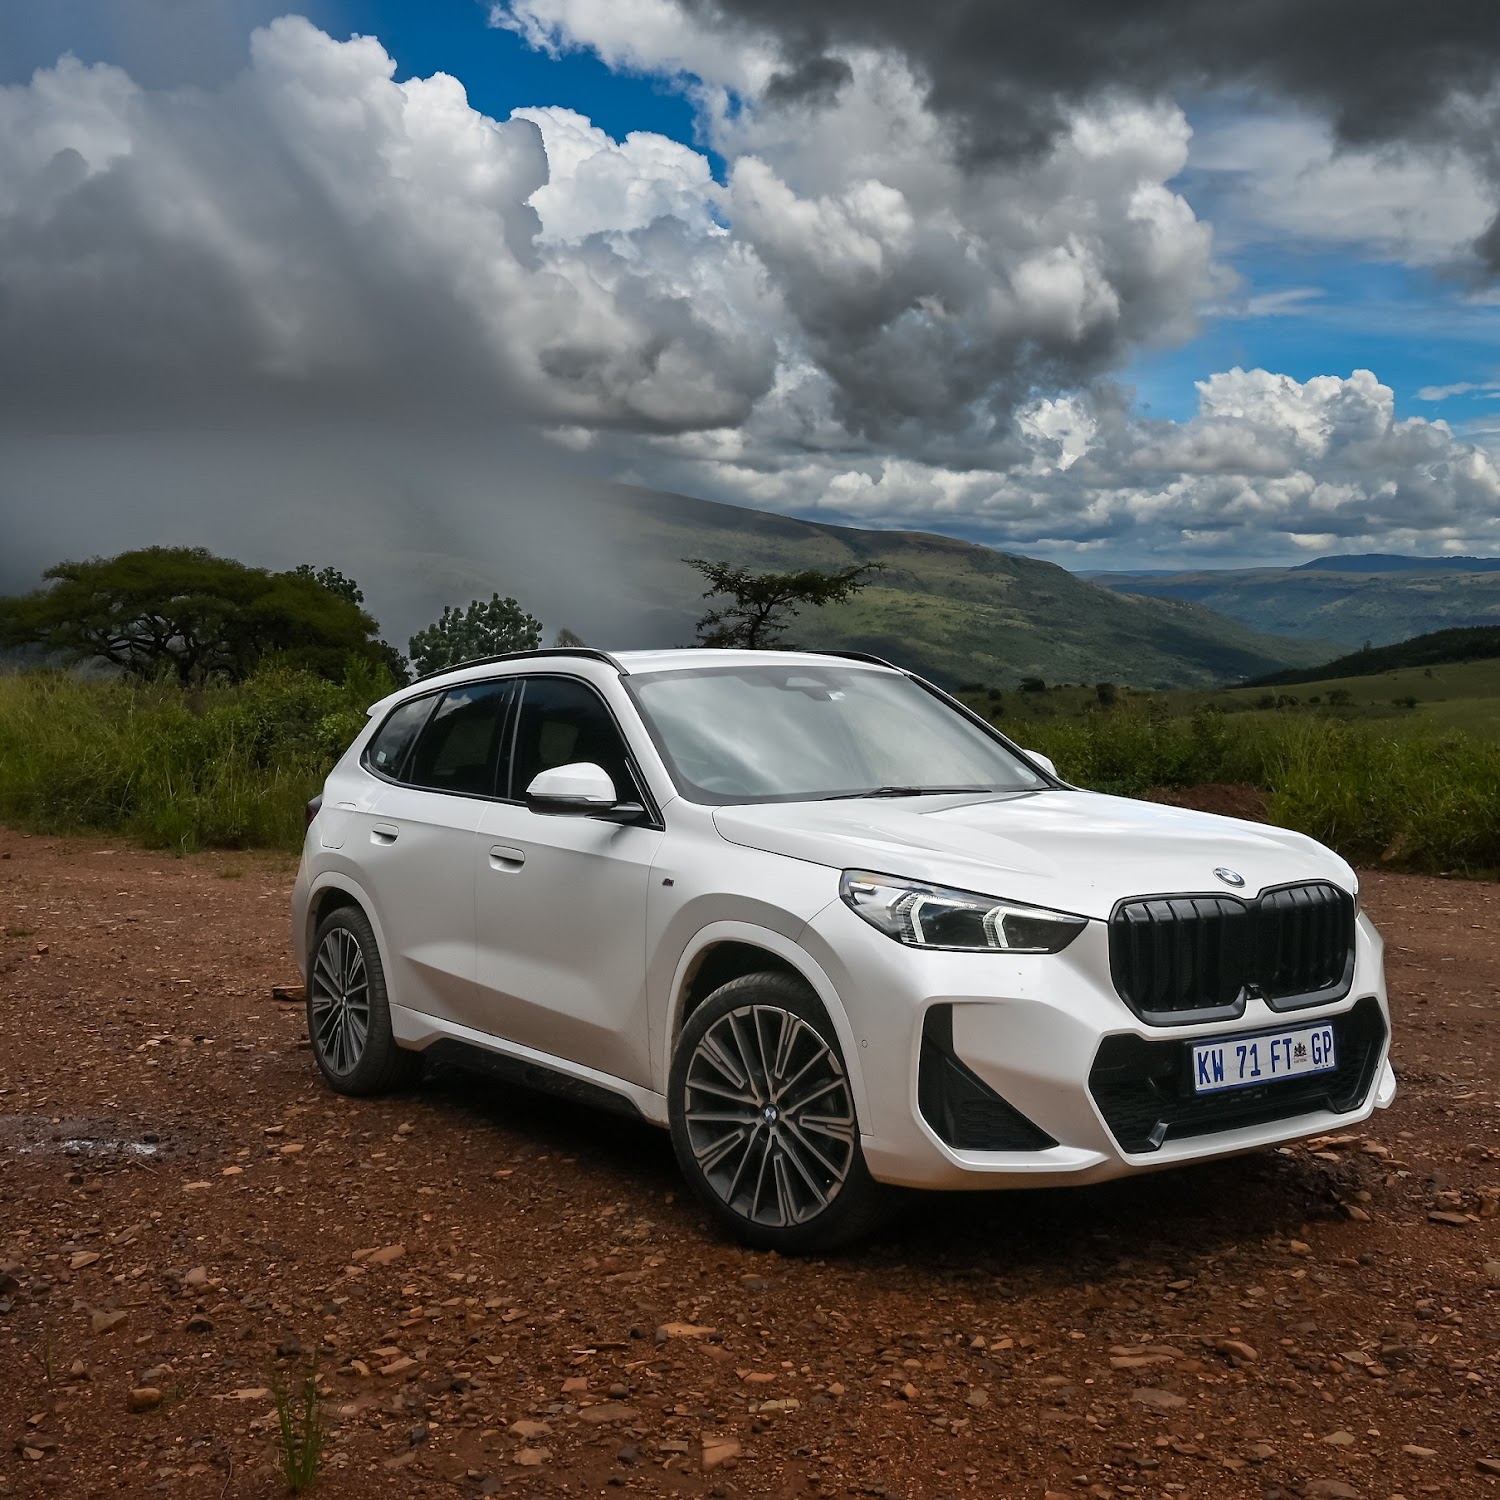 Handsome new BMW X1 now on sale in SA